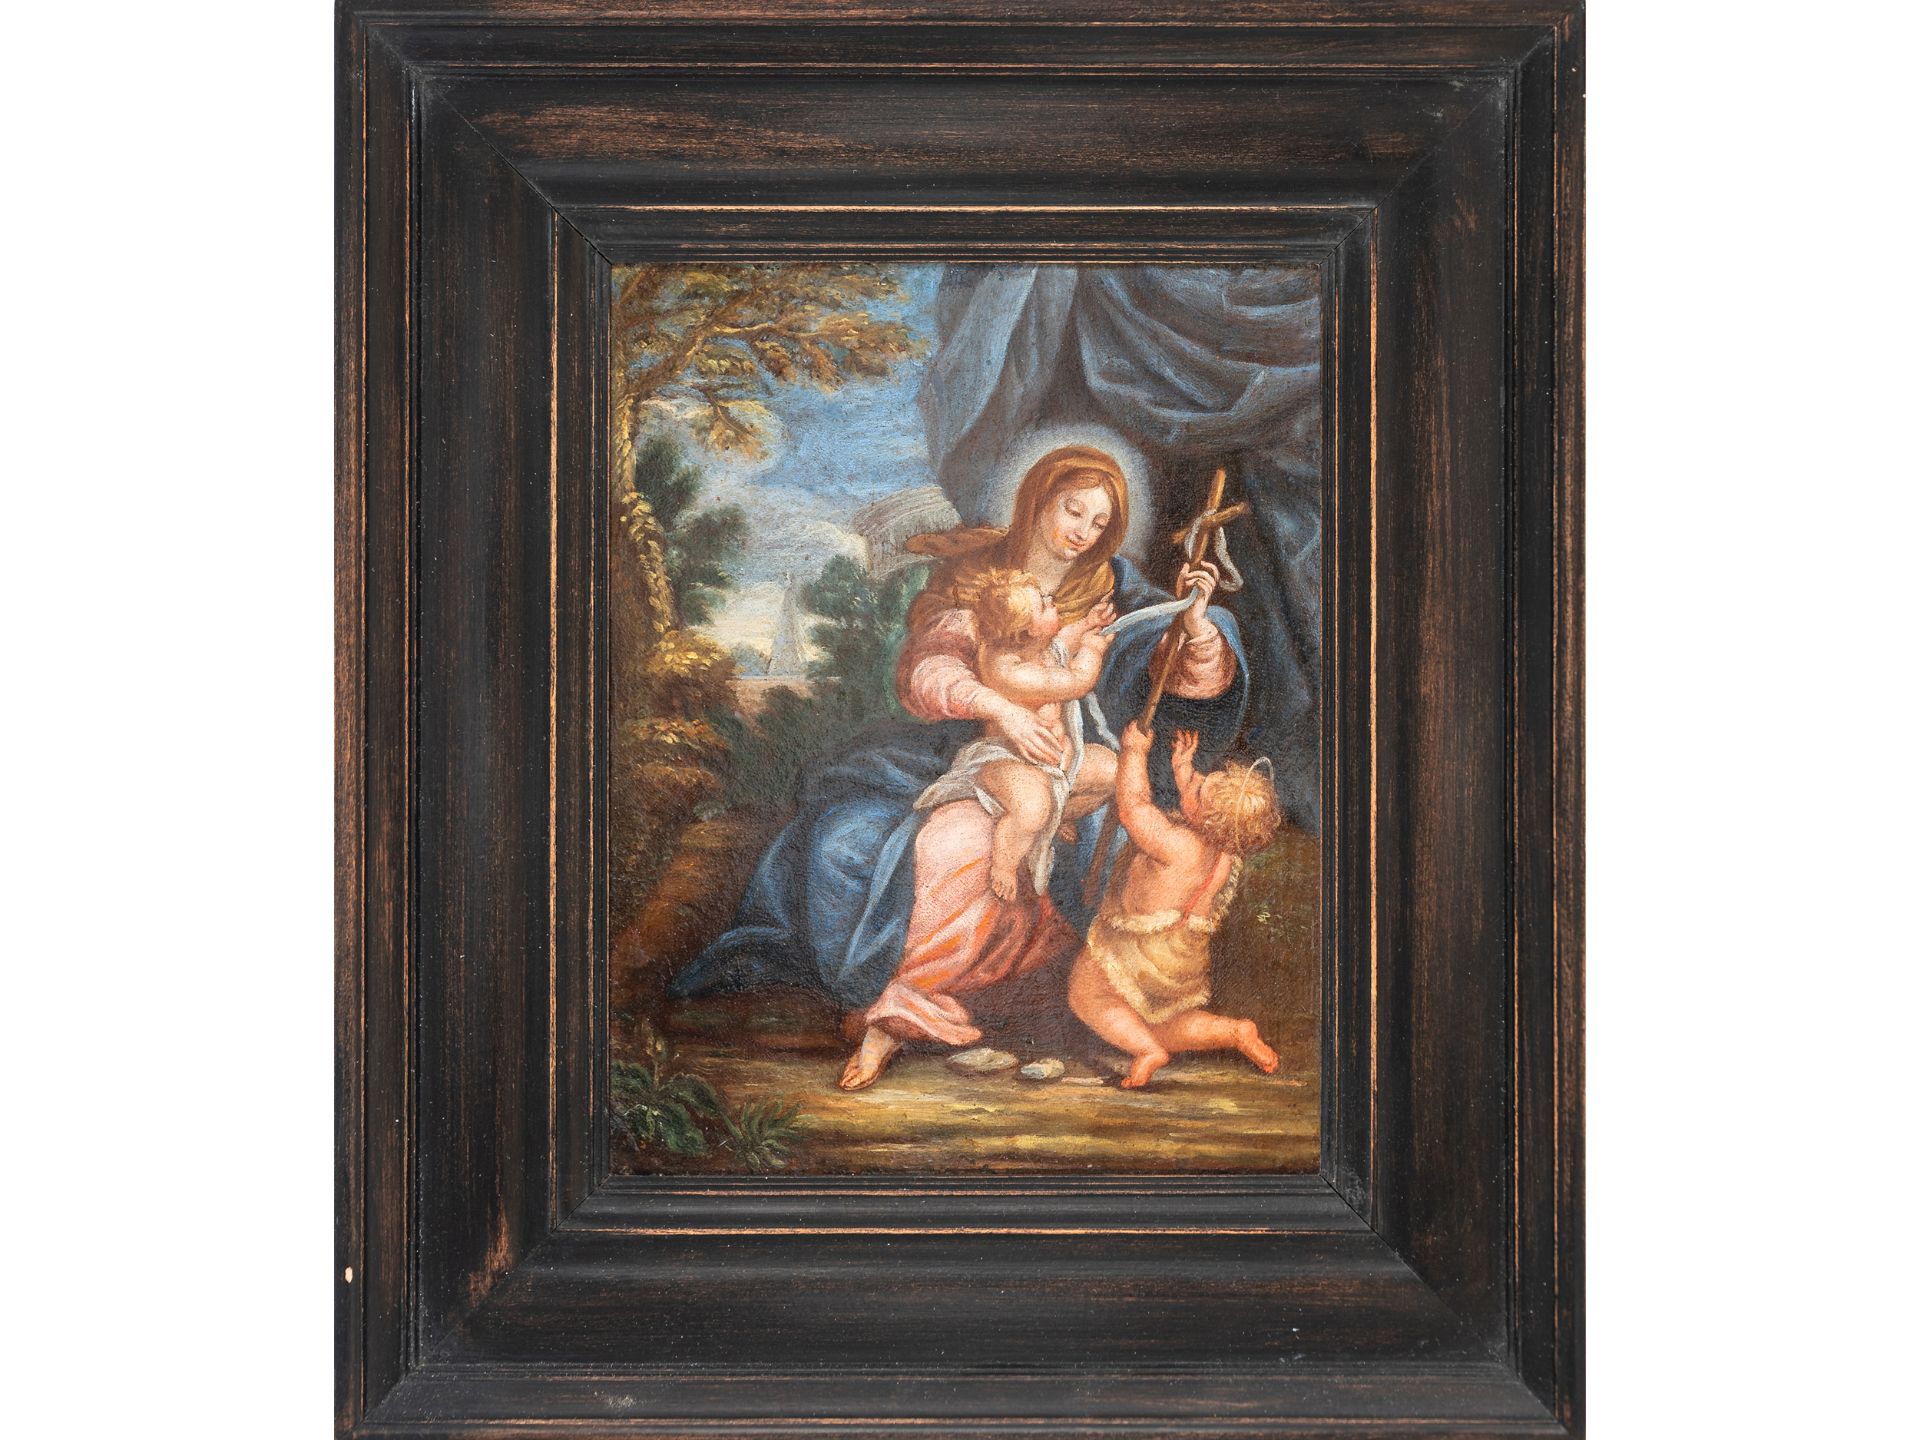 German School, 17th/18th century, Mary with Jesus and the Infant John - Image 2 of 3